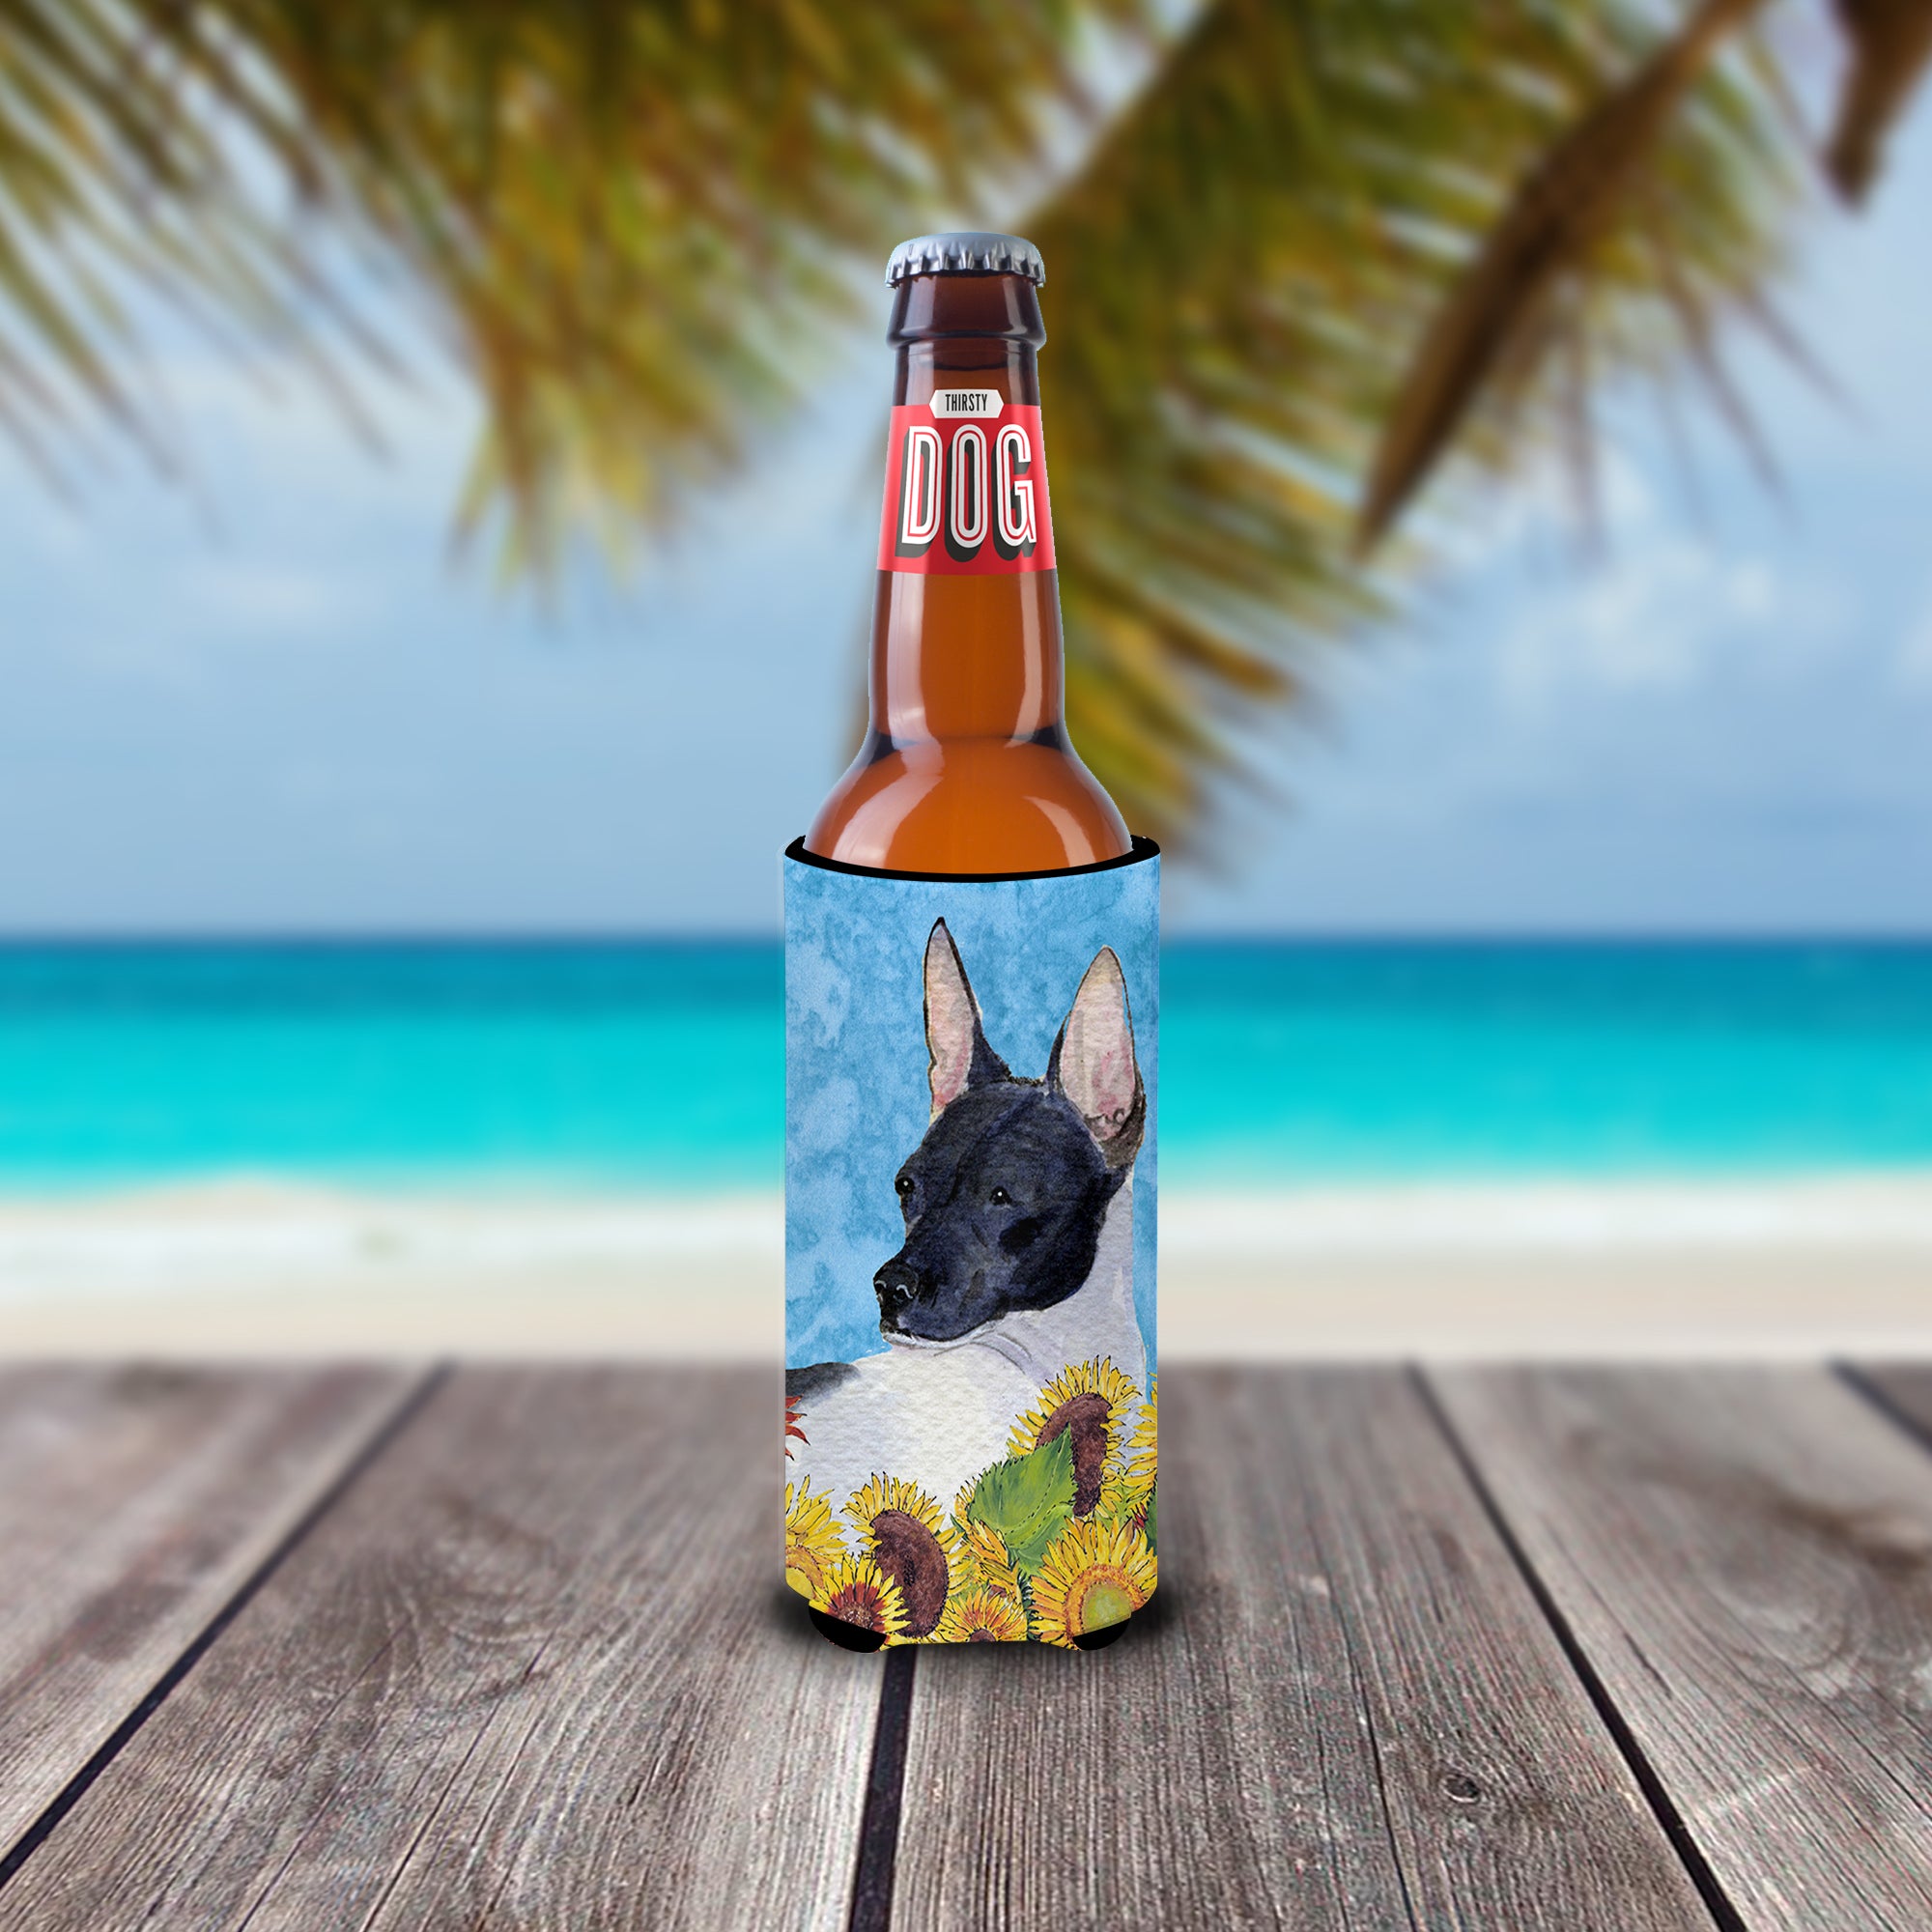 Rat Terrier in Summer Flowers Ultra Beverage Insulators for slim cans SS4113MUK